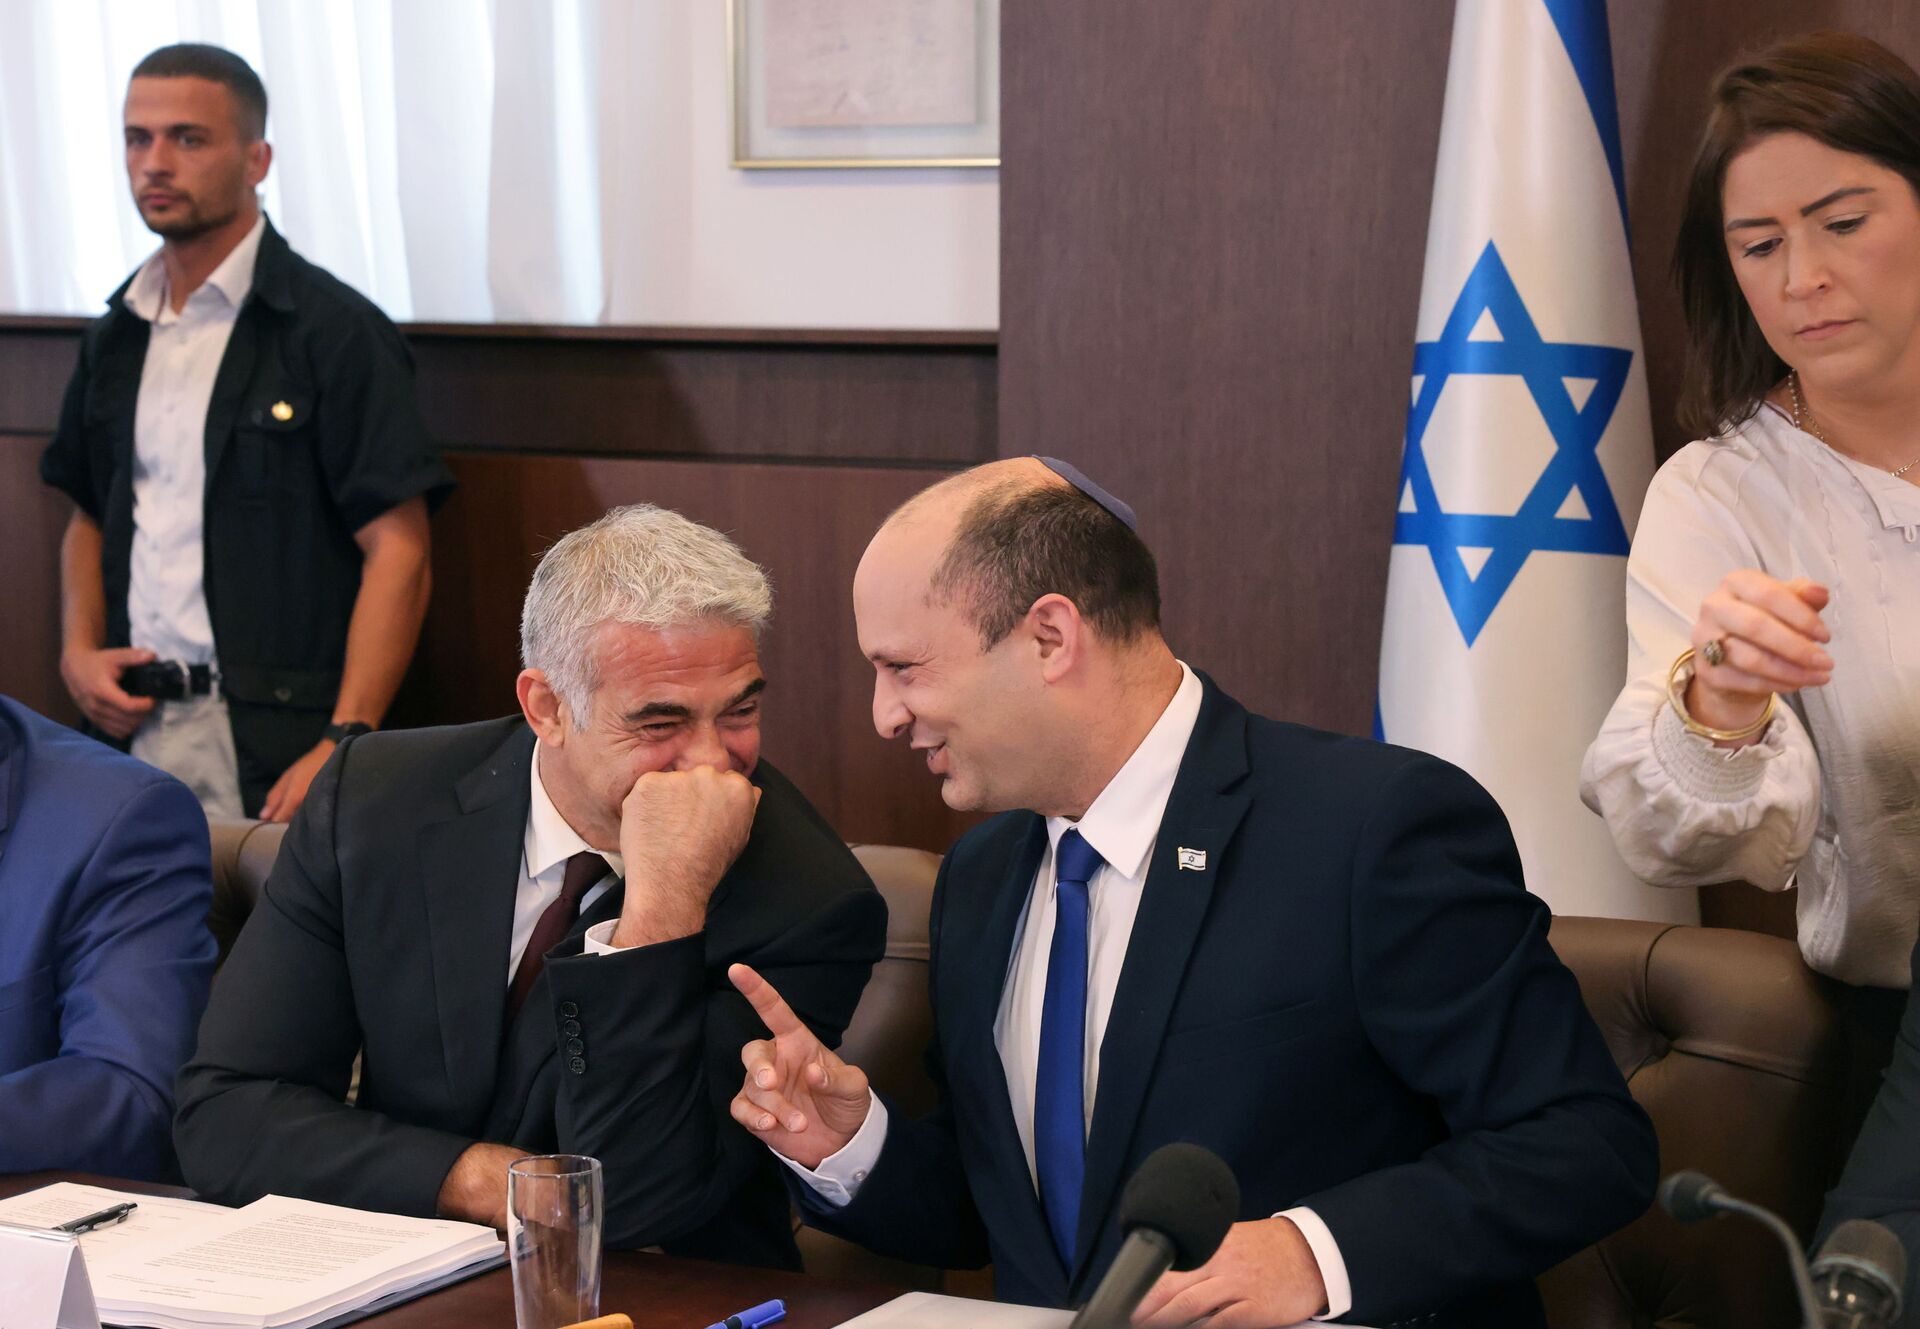 Israeli Prime Minister Naftali Bennett shares a joke with alternate Prime Minister and Foreign Minister Yair Lapid during the first weekly cabinet meeting of their new government in Jerusalem June 20, 2021. - Sputnik International, 1920, 07.09.2021